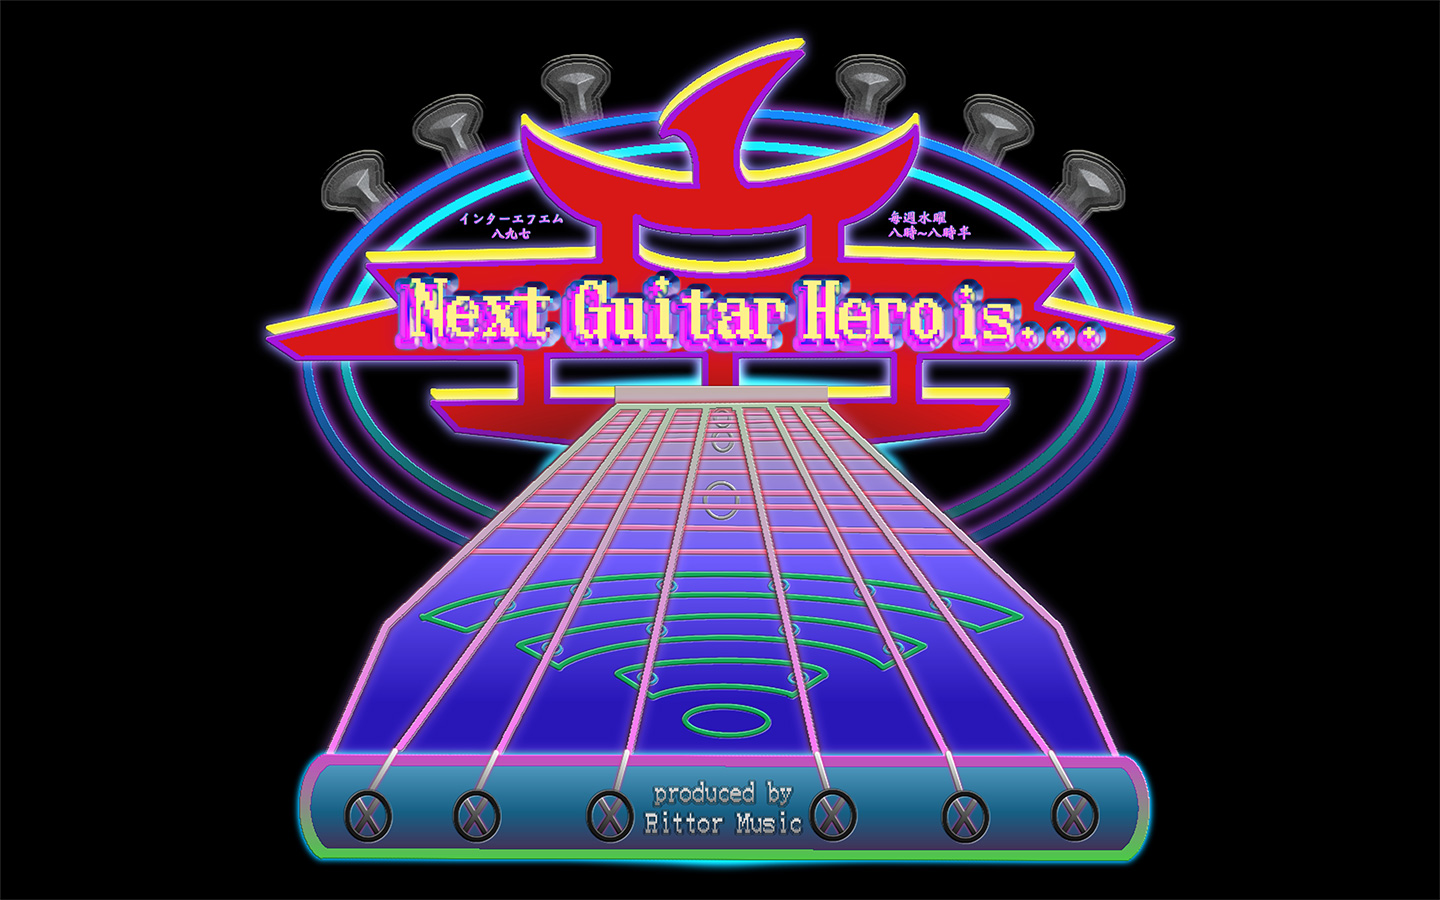 Next Guitar Hero is... produced by Rittor Music